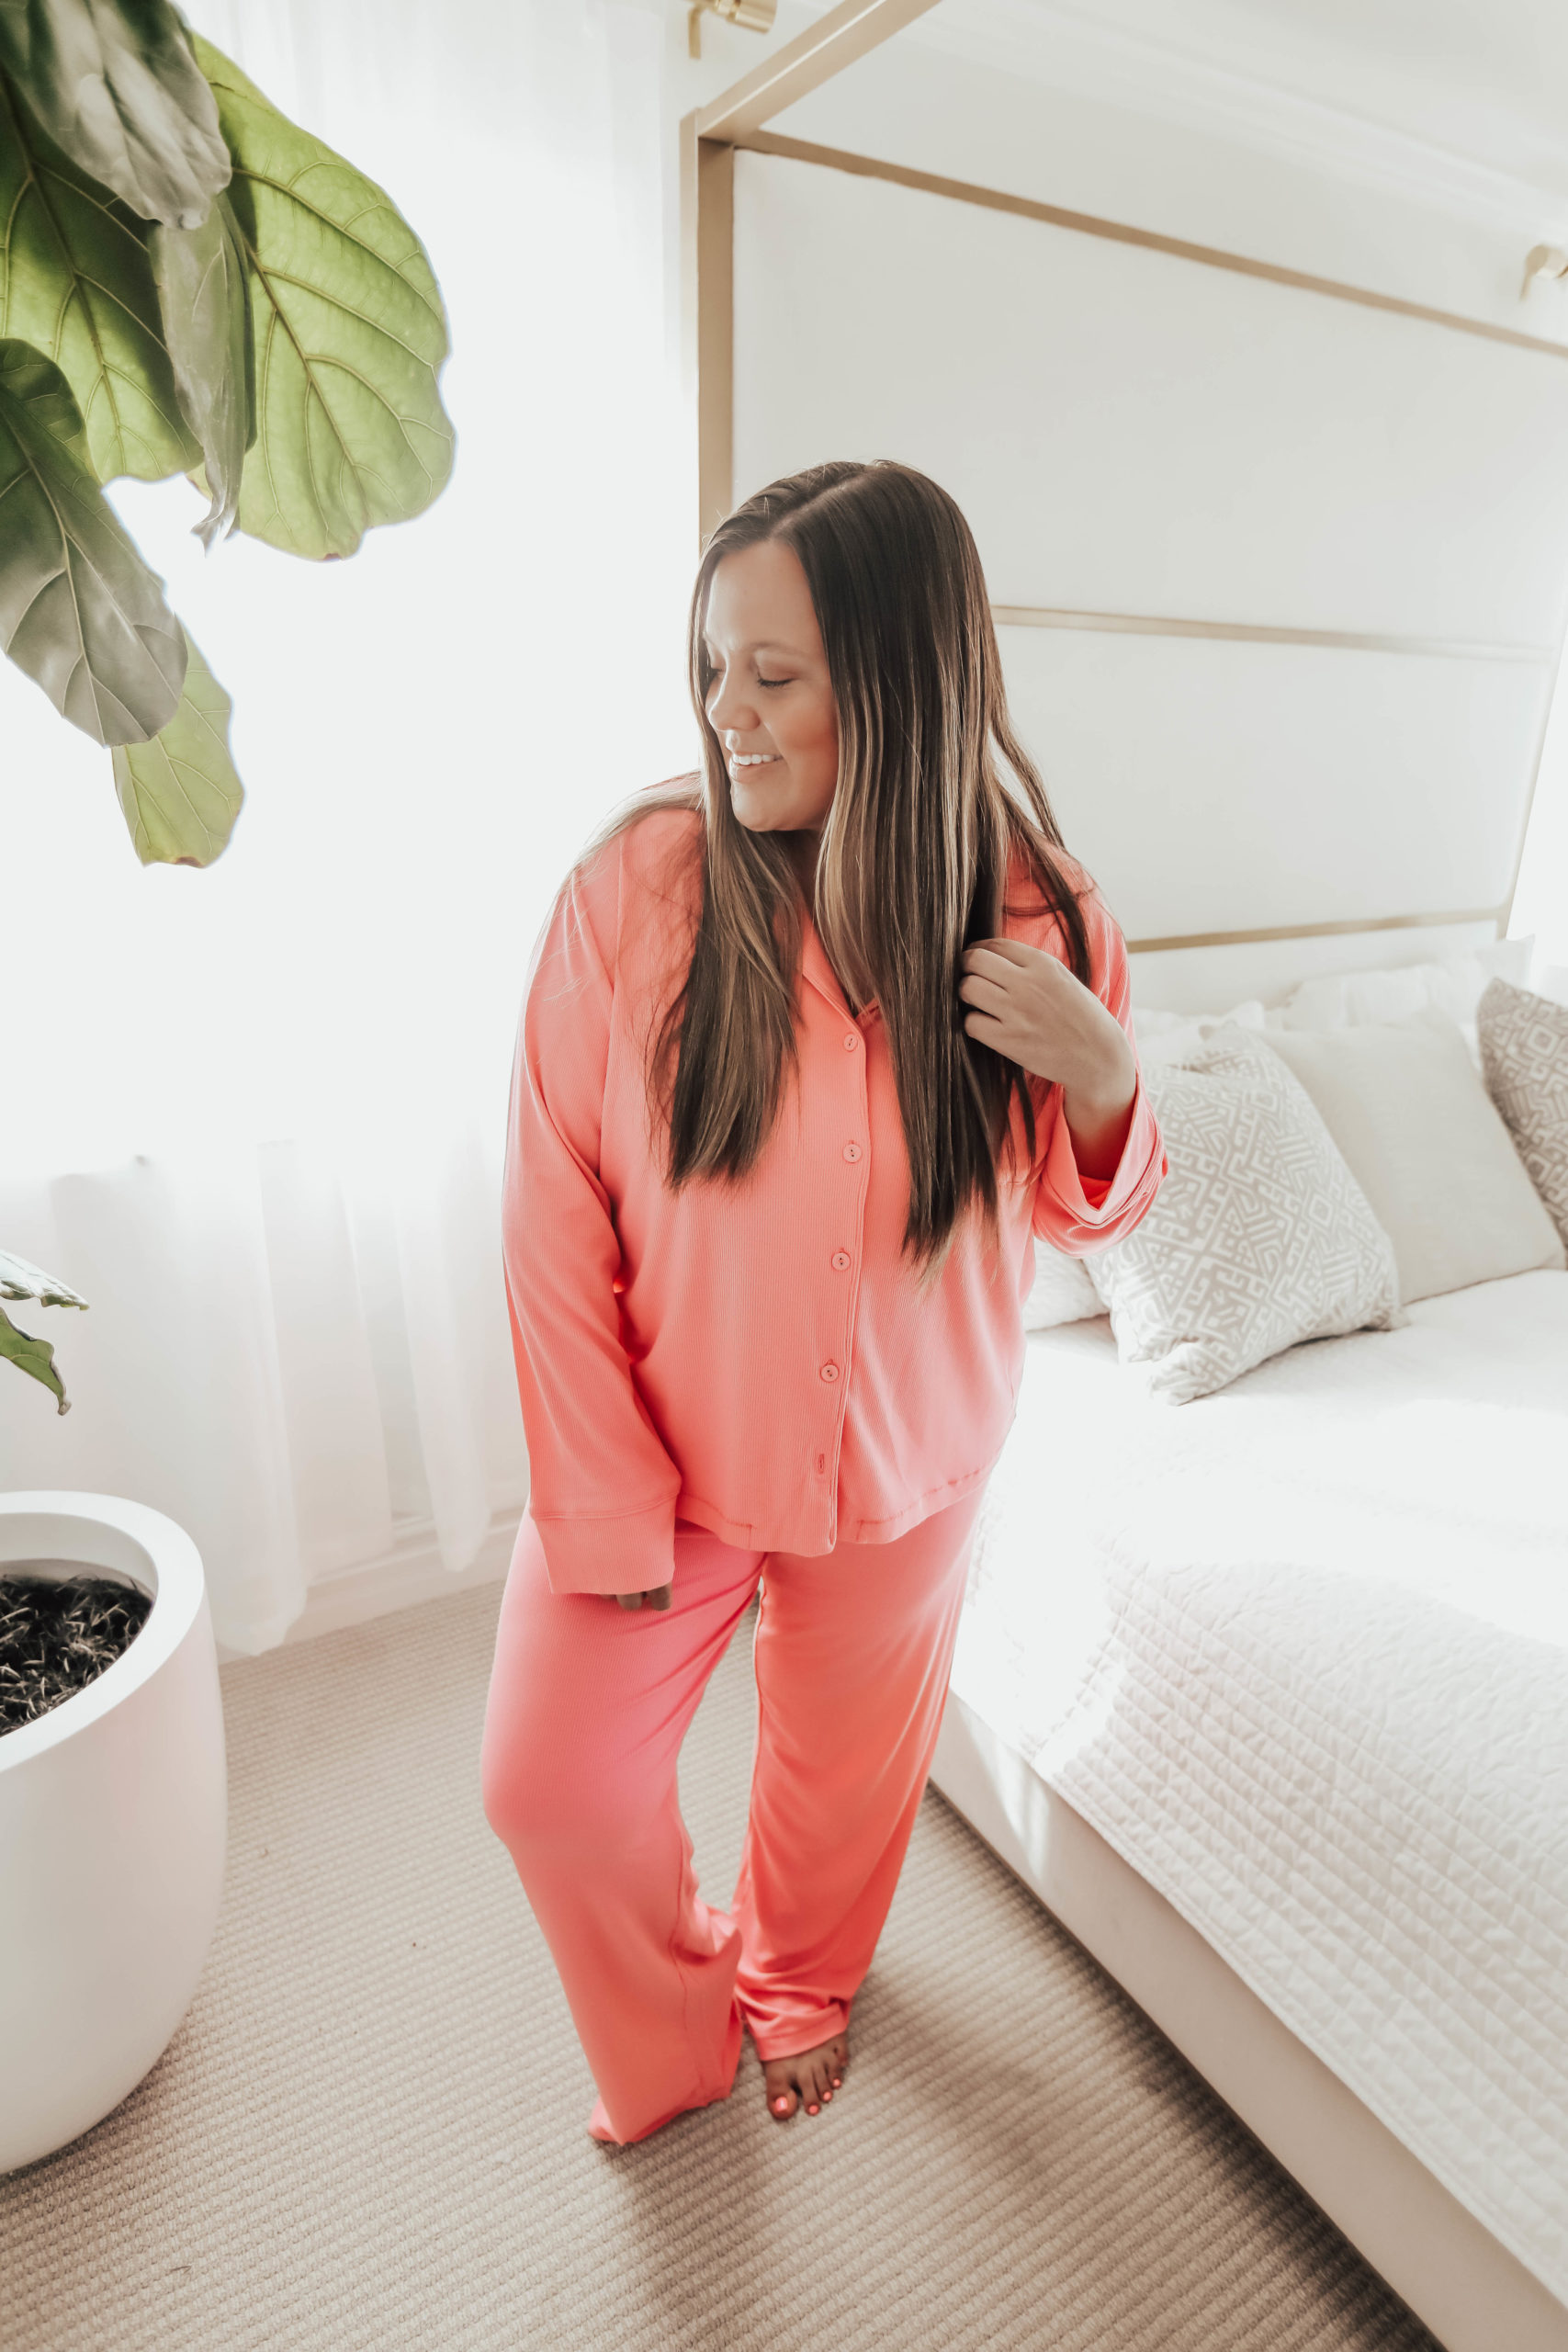 Reno bloggers Ashley Zeal Hurd and Emily Wieczorek share their Nordstrom staples - all the items they can't live without.